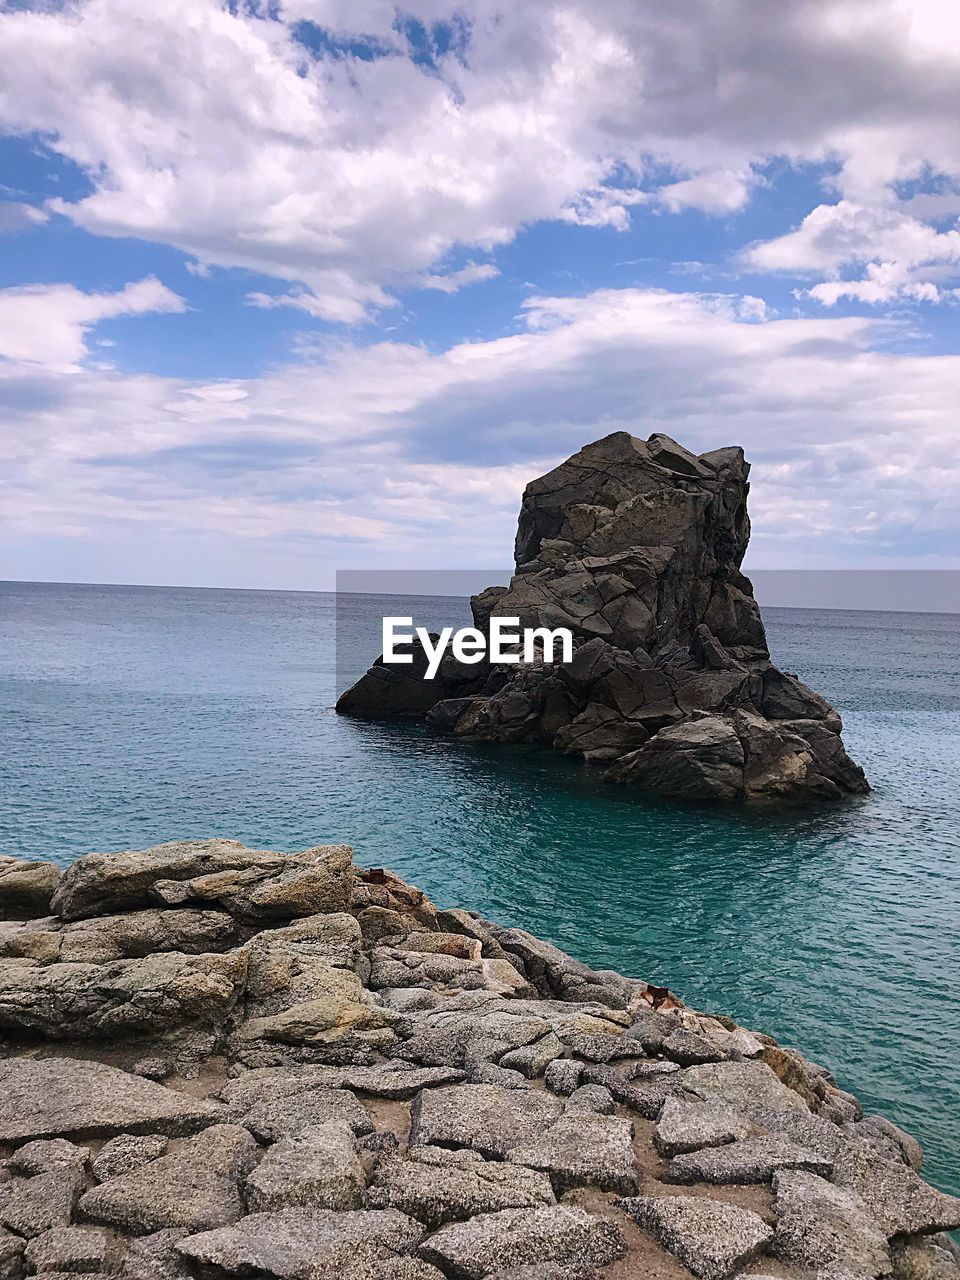 SCENIC VIEW OF ROCK FORMATION ON SEA AGAINST SKY